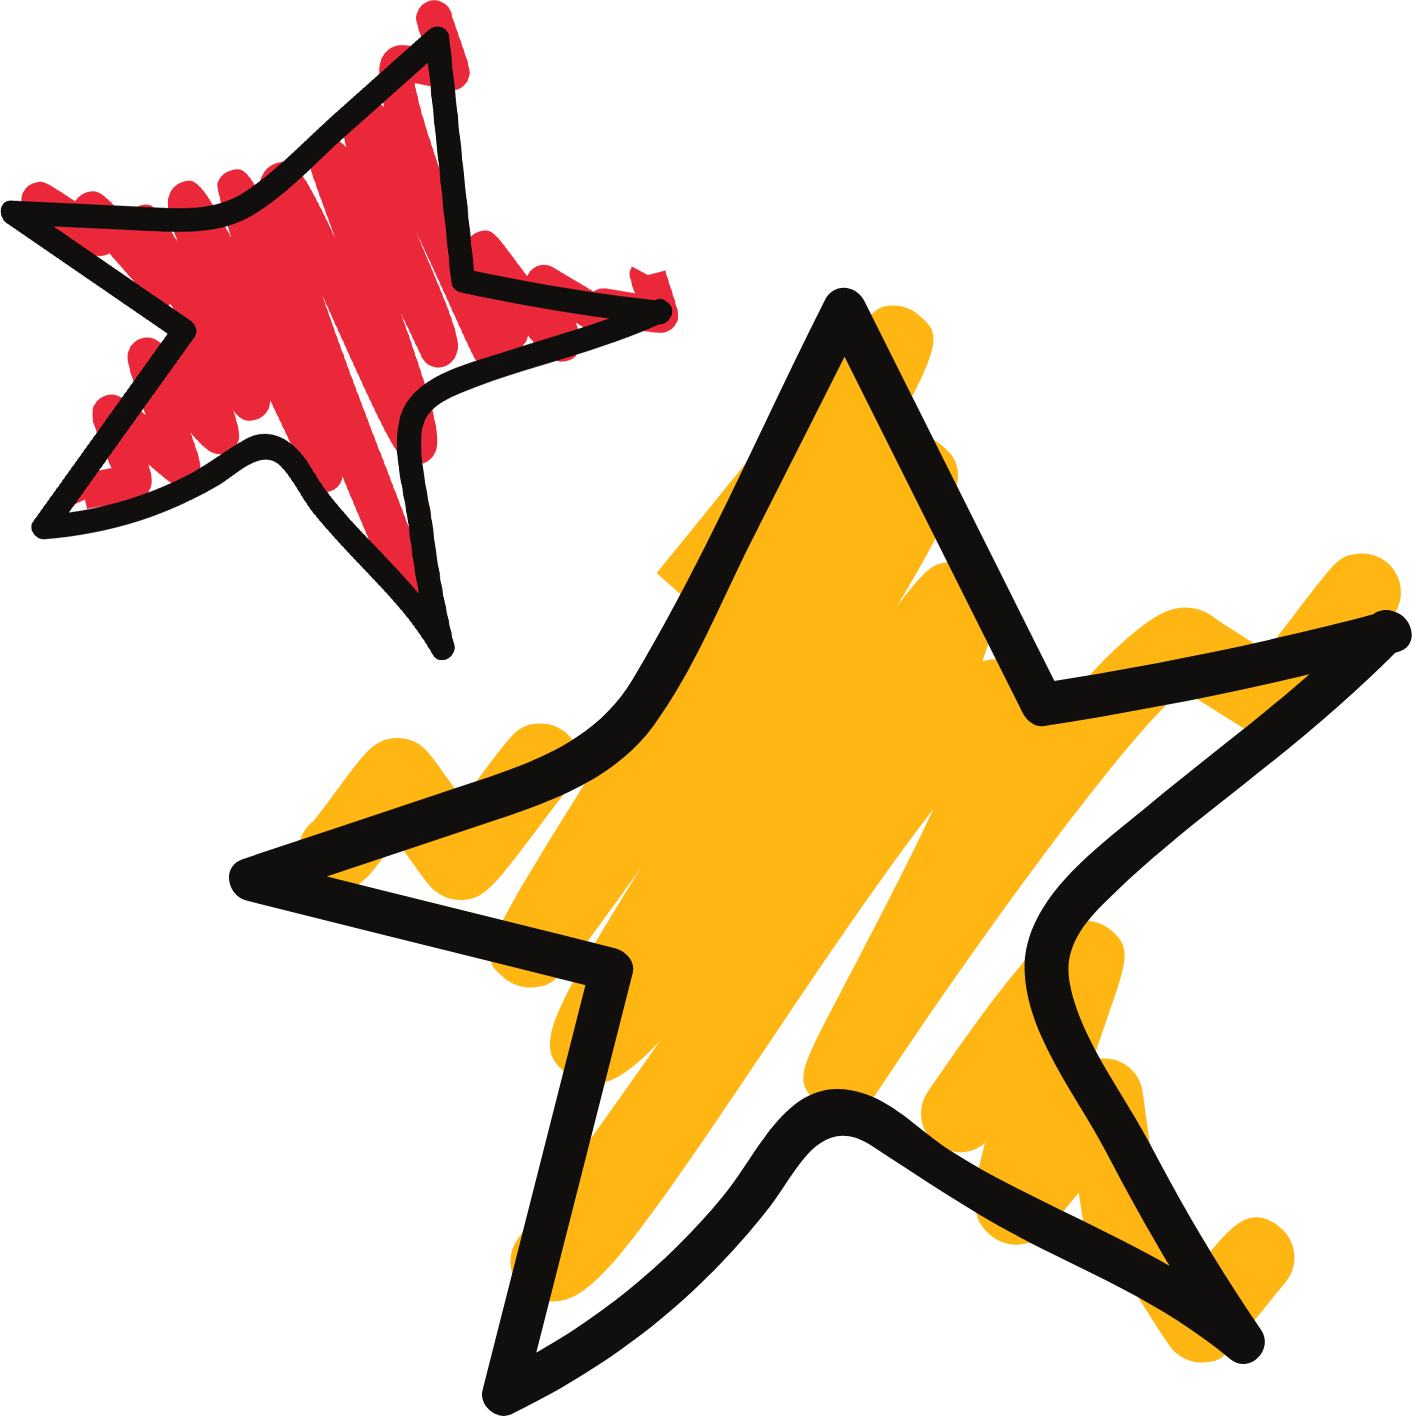 Scribble Star in Red and Yellow